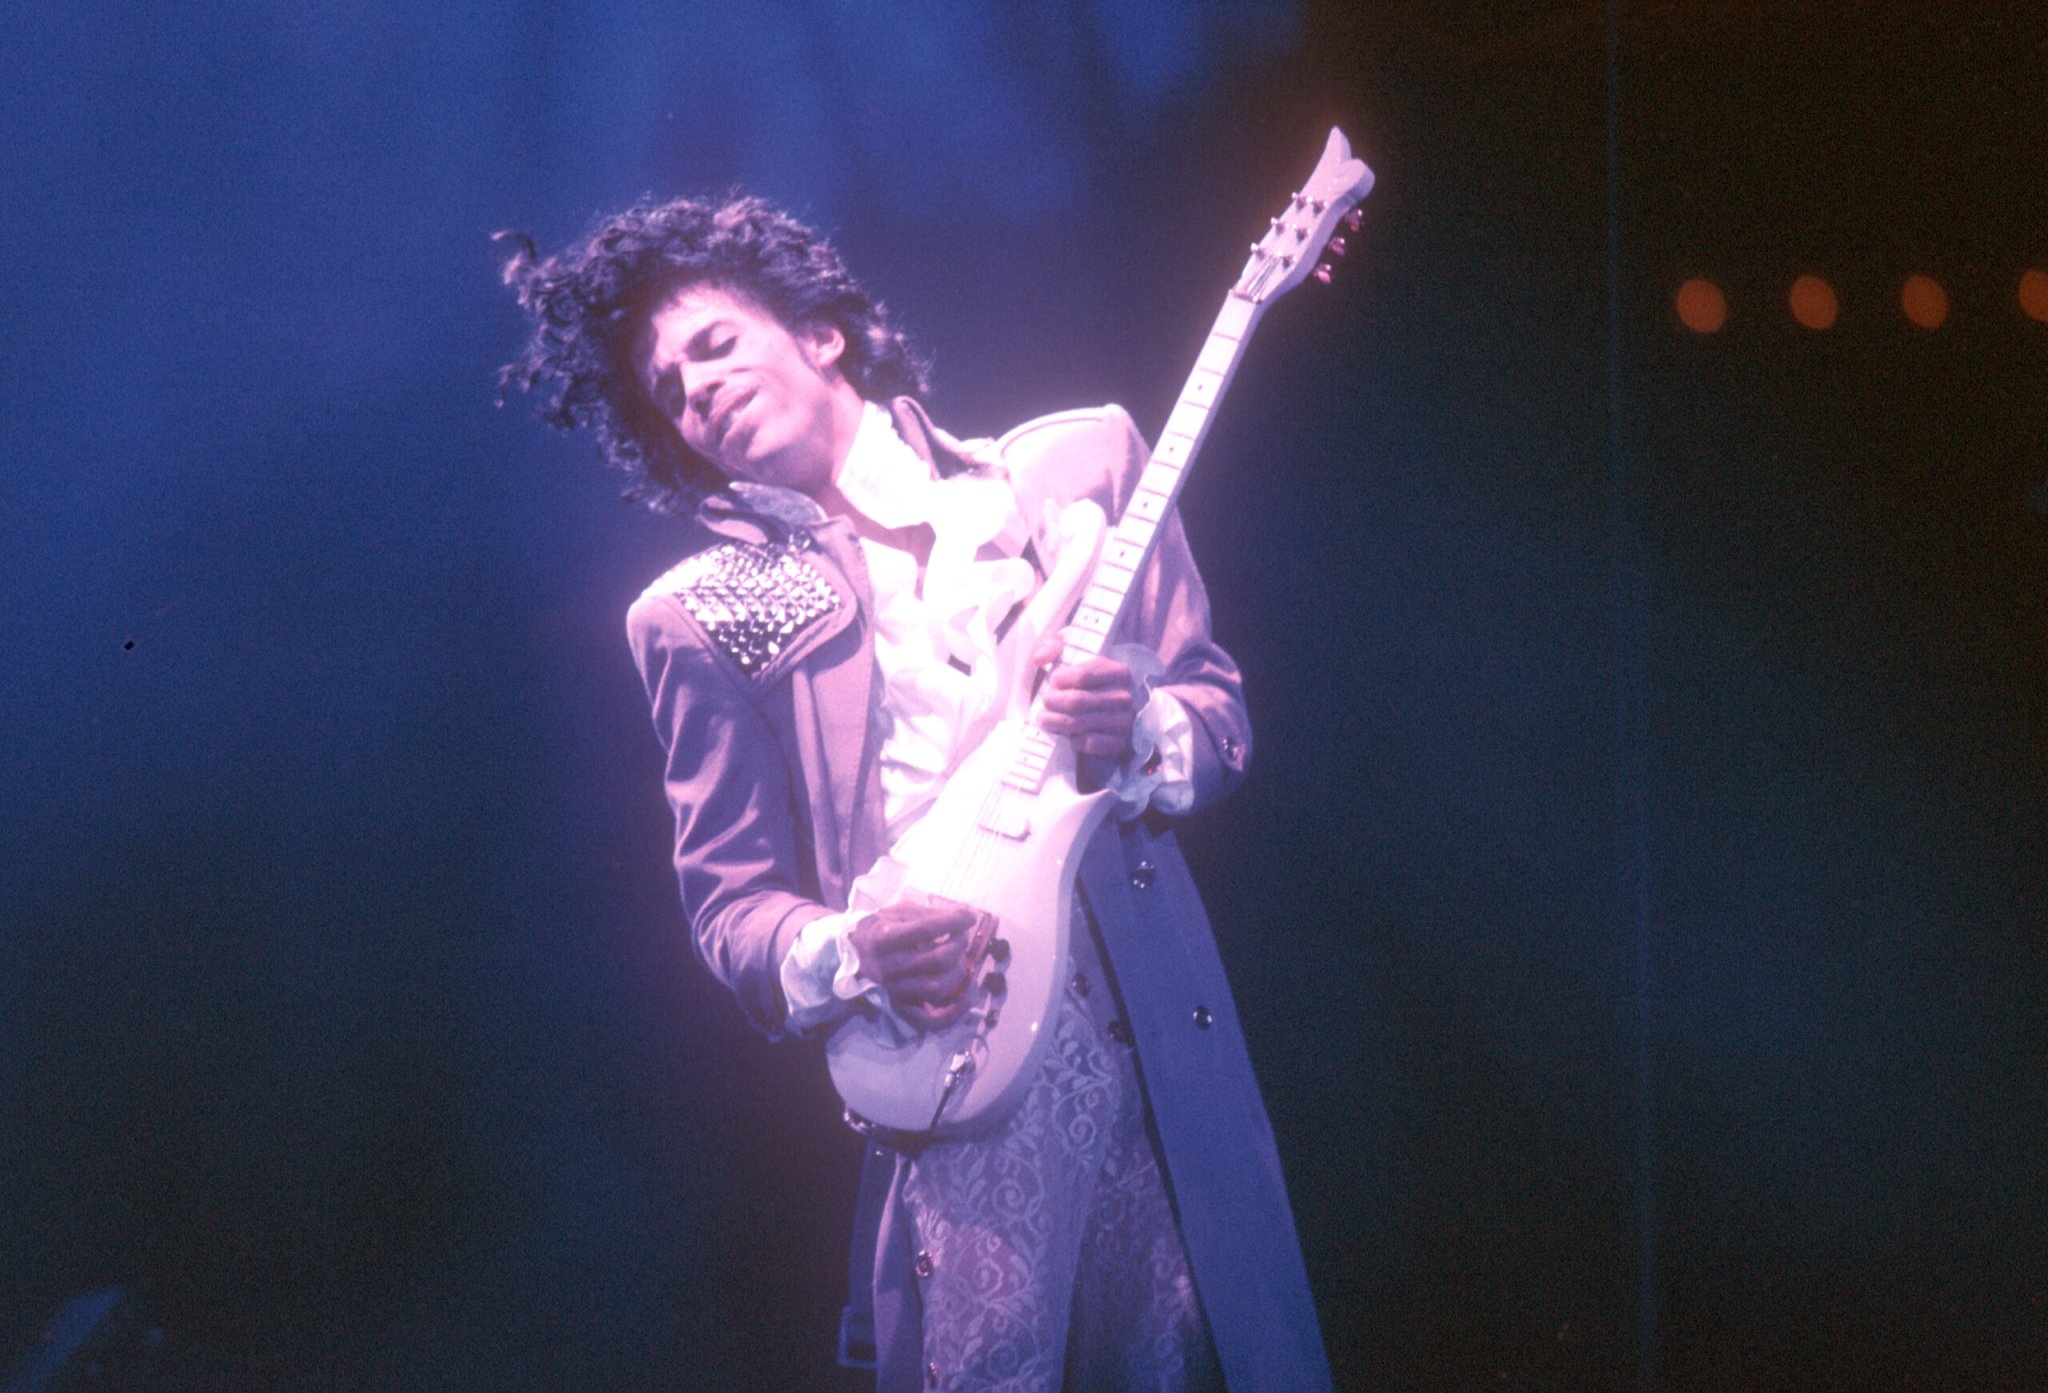 Watch Prince's 'Little Red Corvette' Restored from 1985 Syracuse Concert